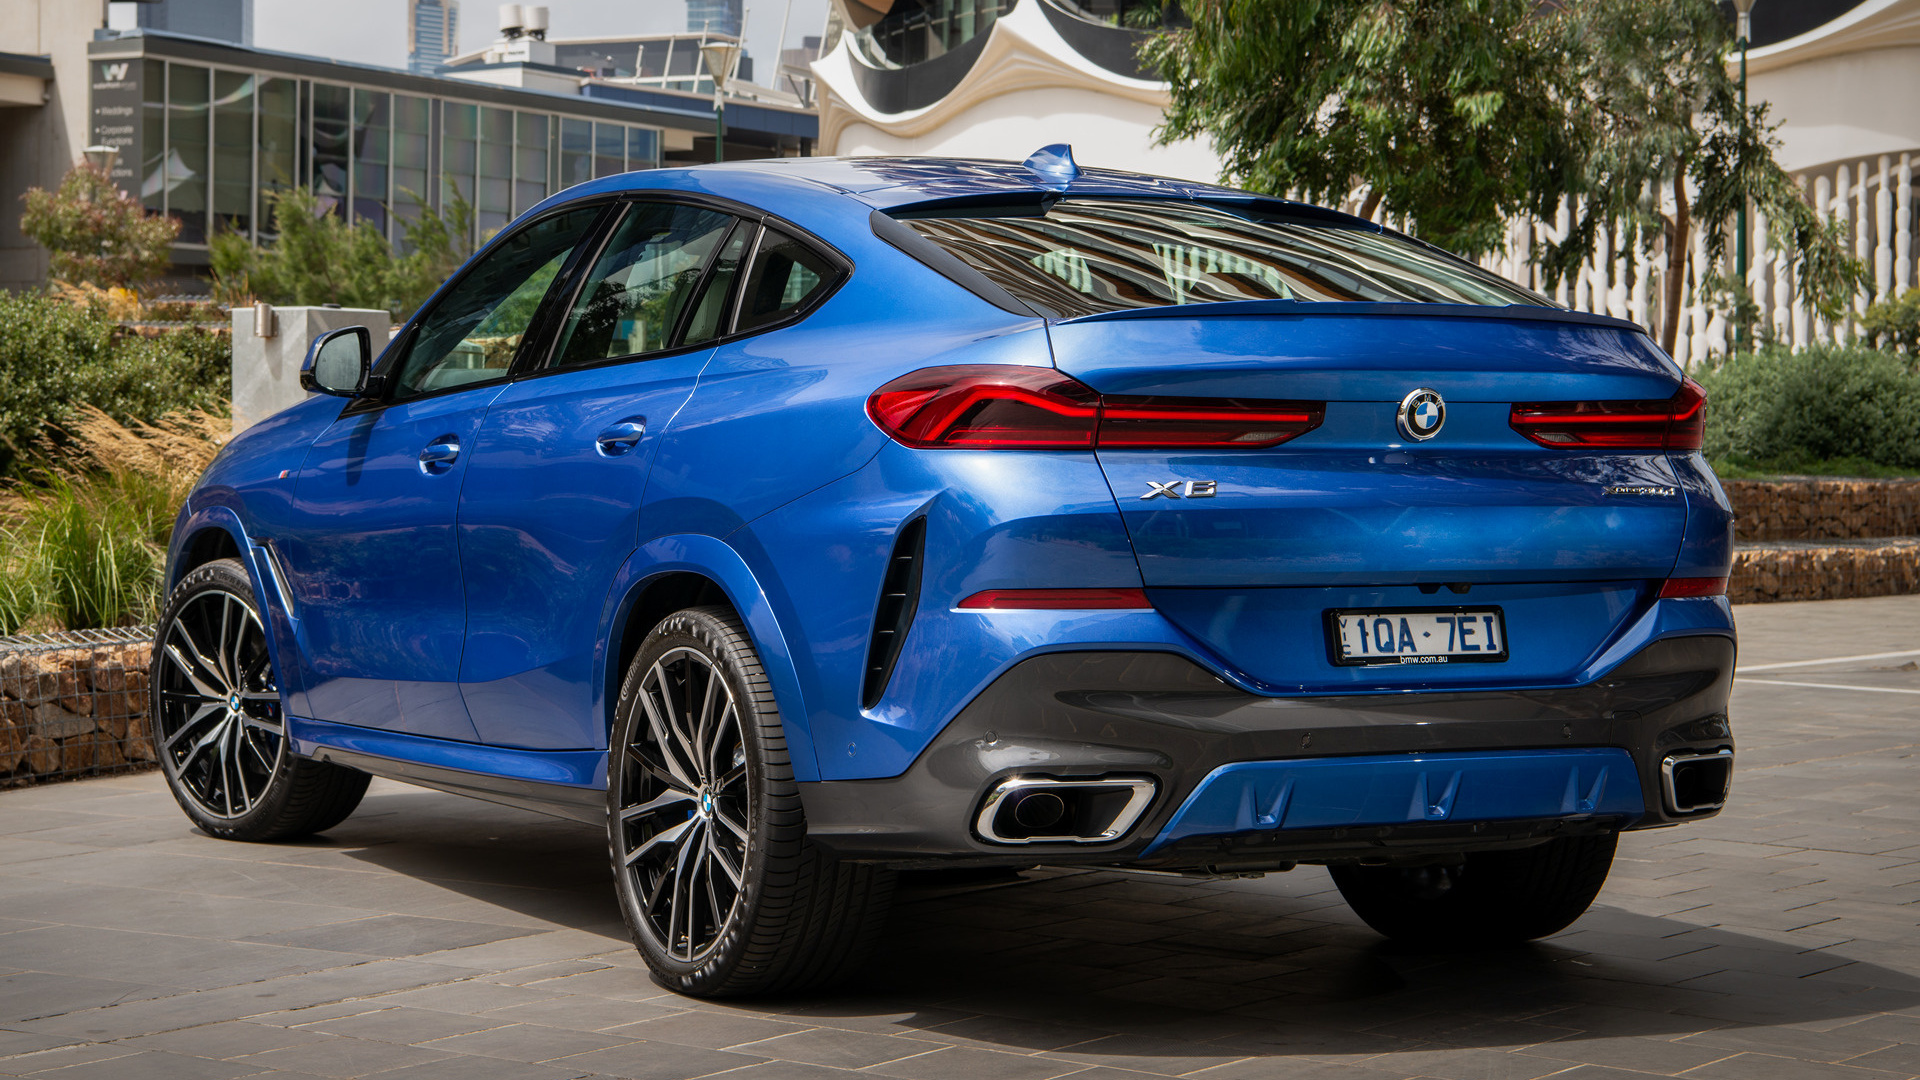 2020 BMW X6 M Sport (AU) - Wallpapers and HD Images | Car ...